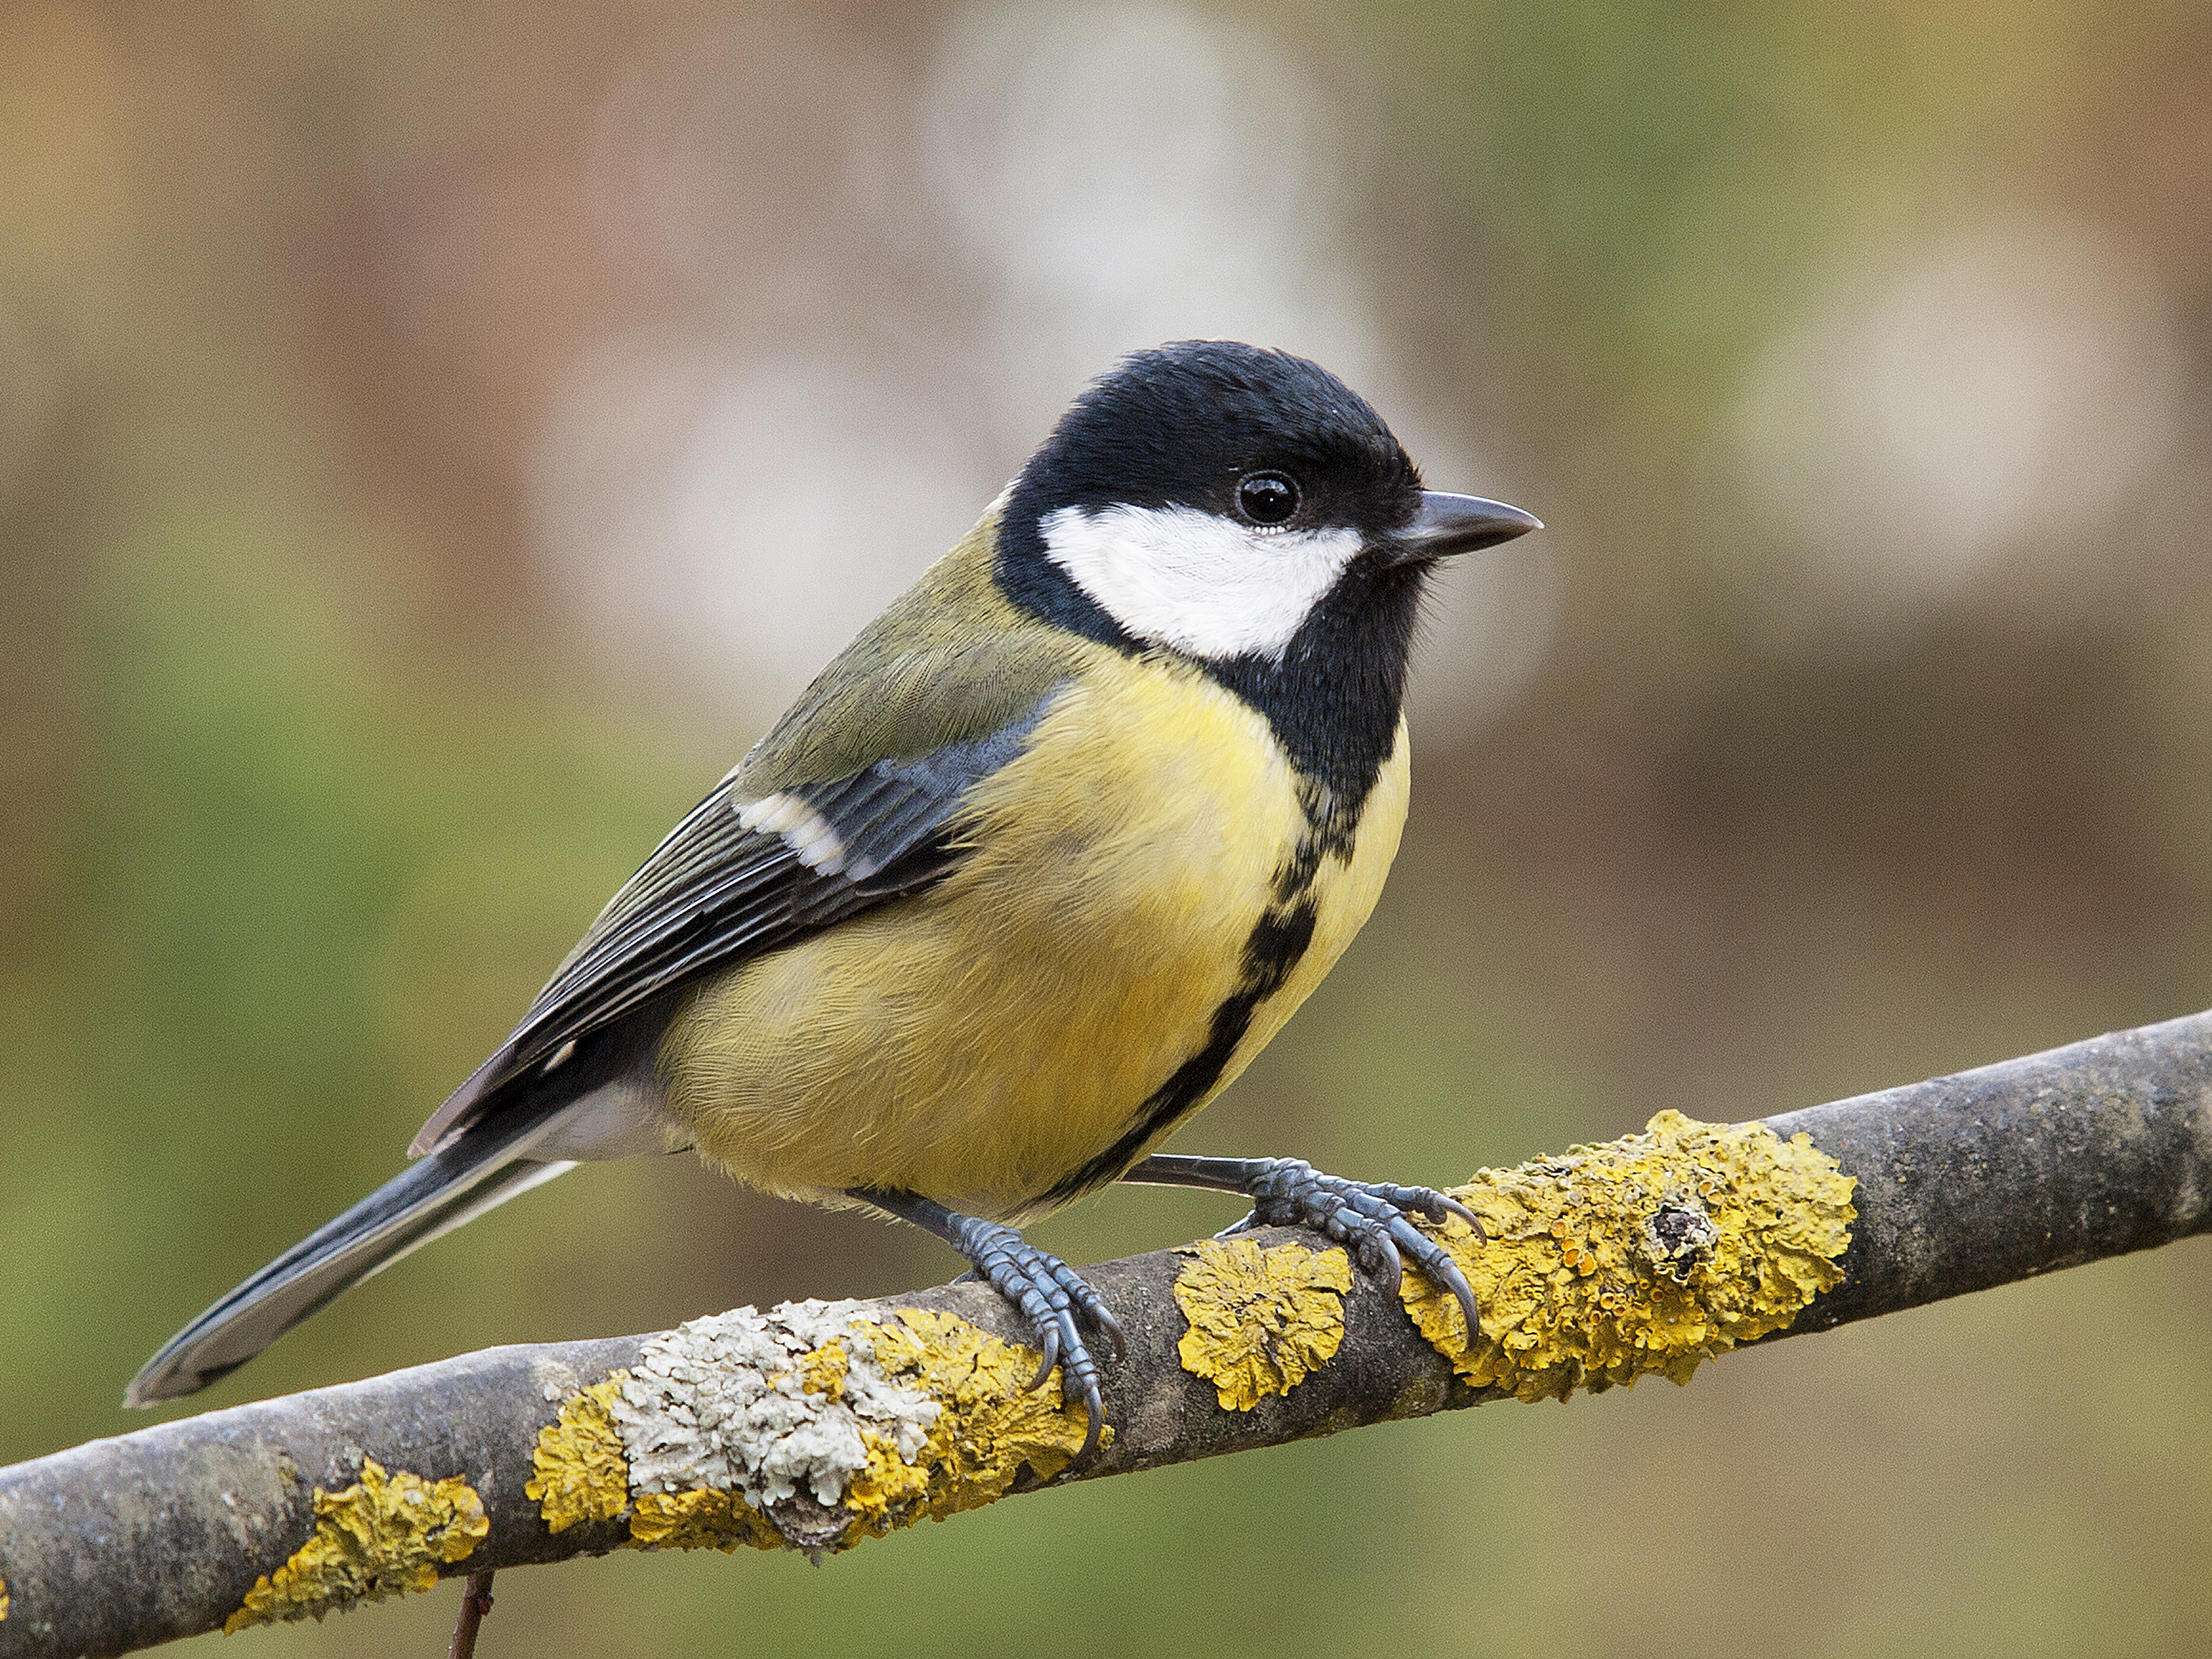 A brain-eating species called the great tit is threatening other